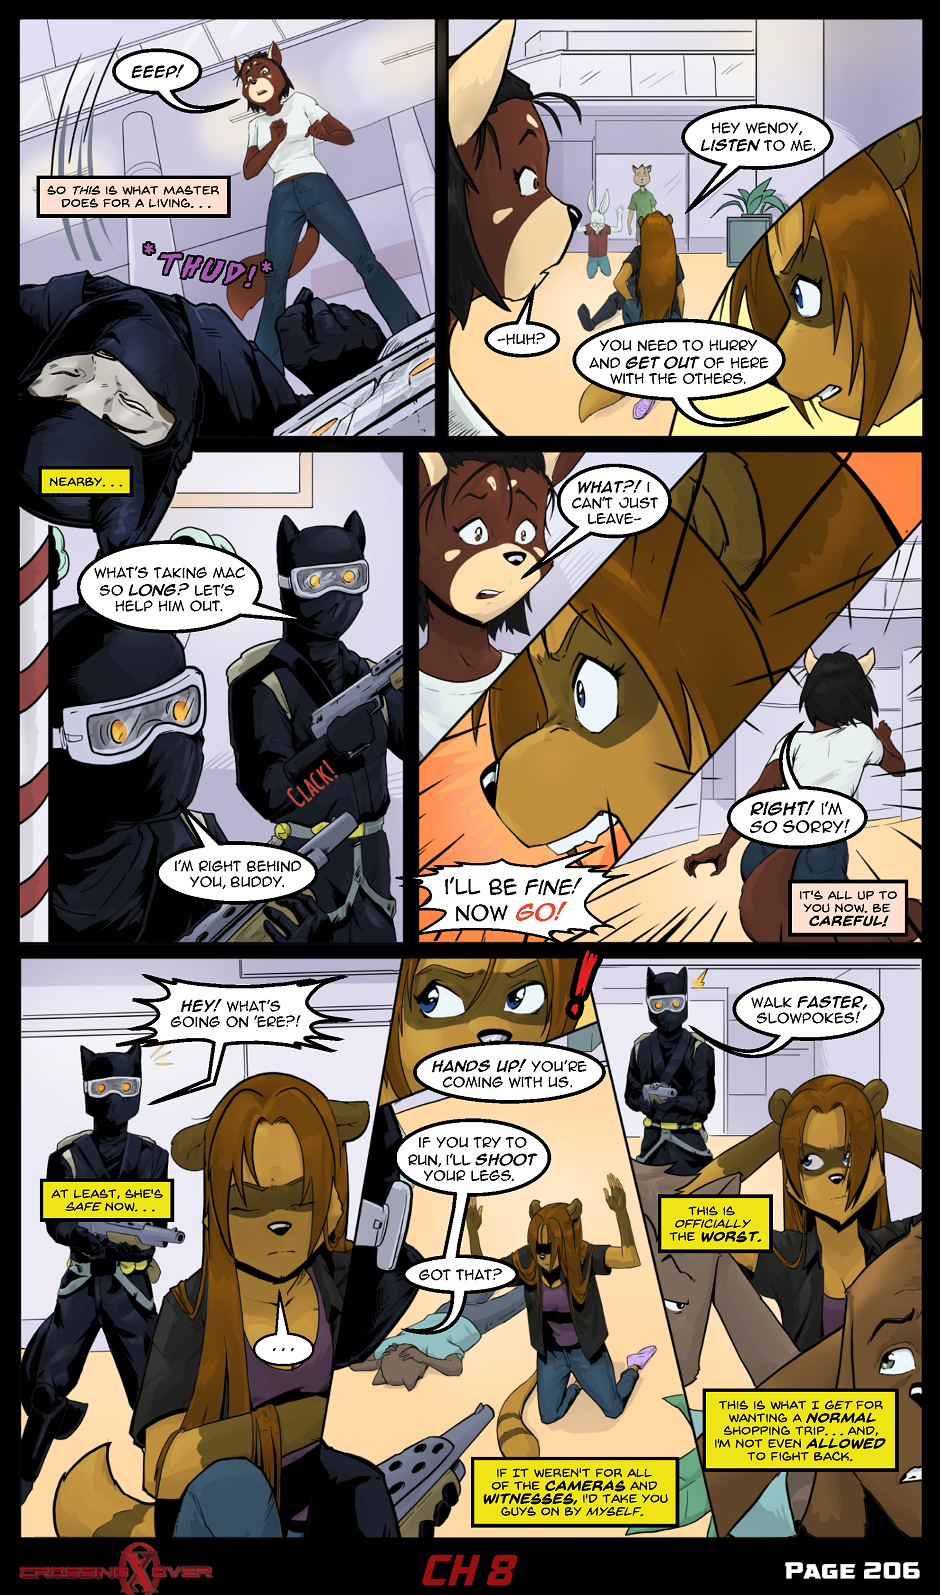 Page 206 (Ch 8)